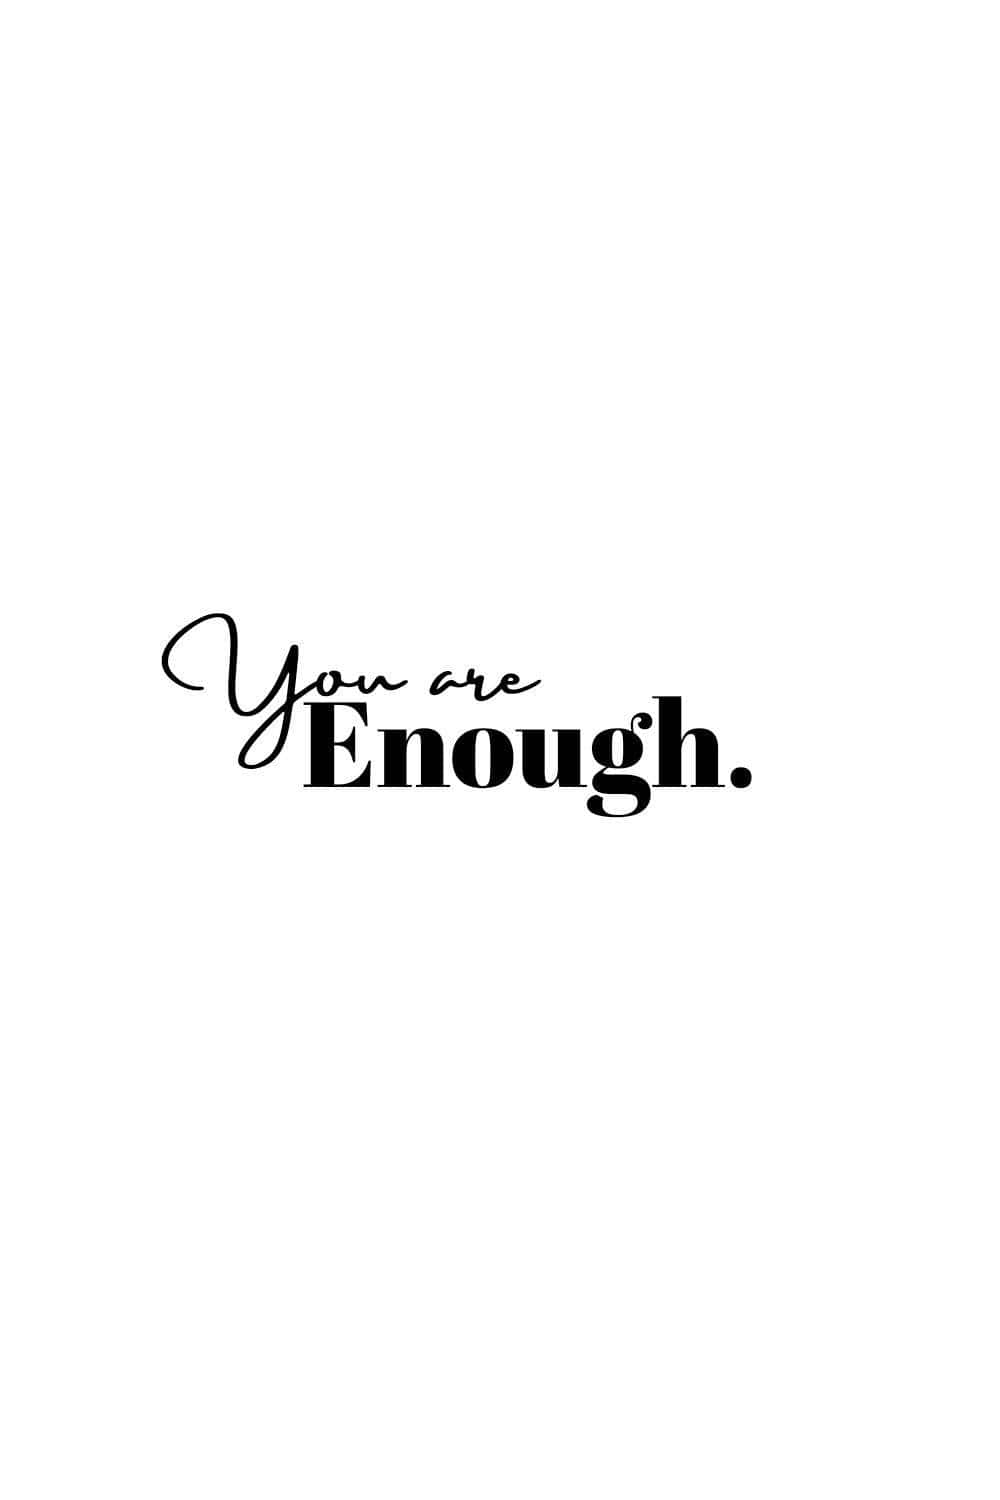 100+] You Are Enough Wallpapers 